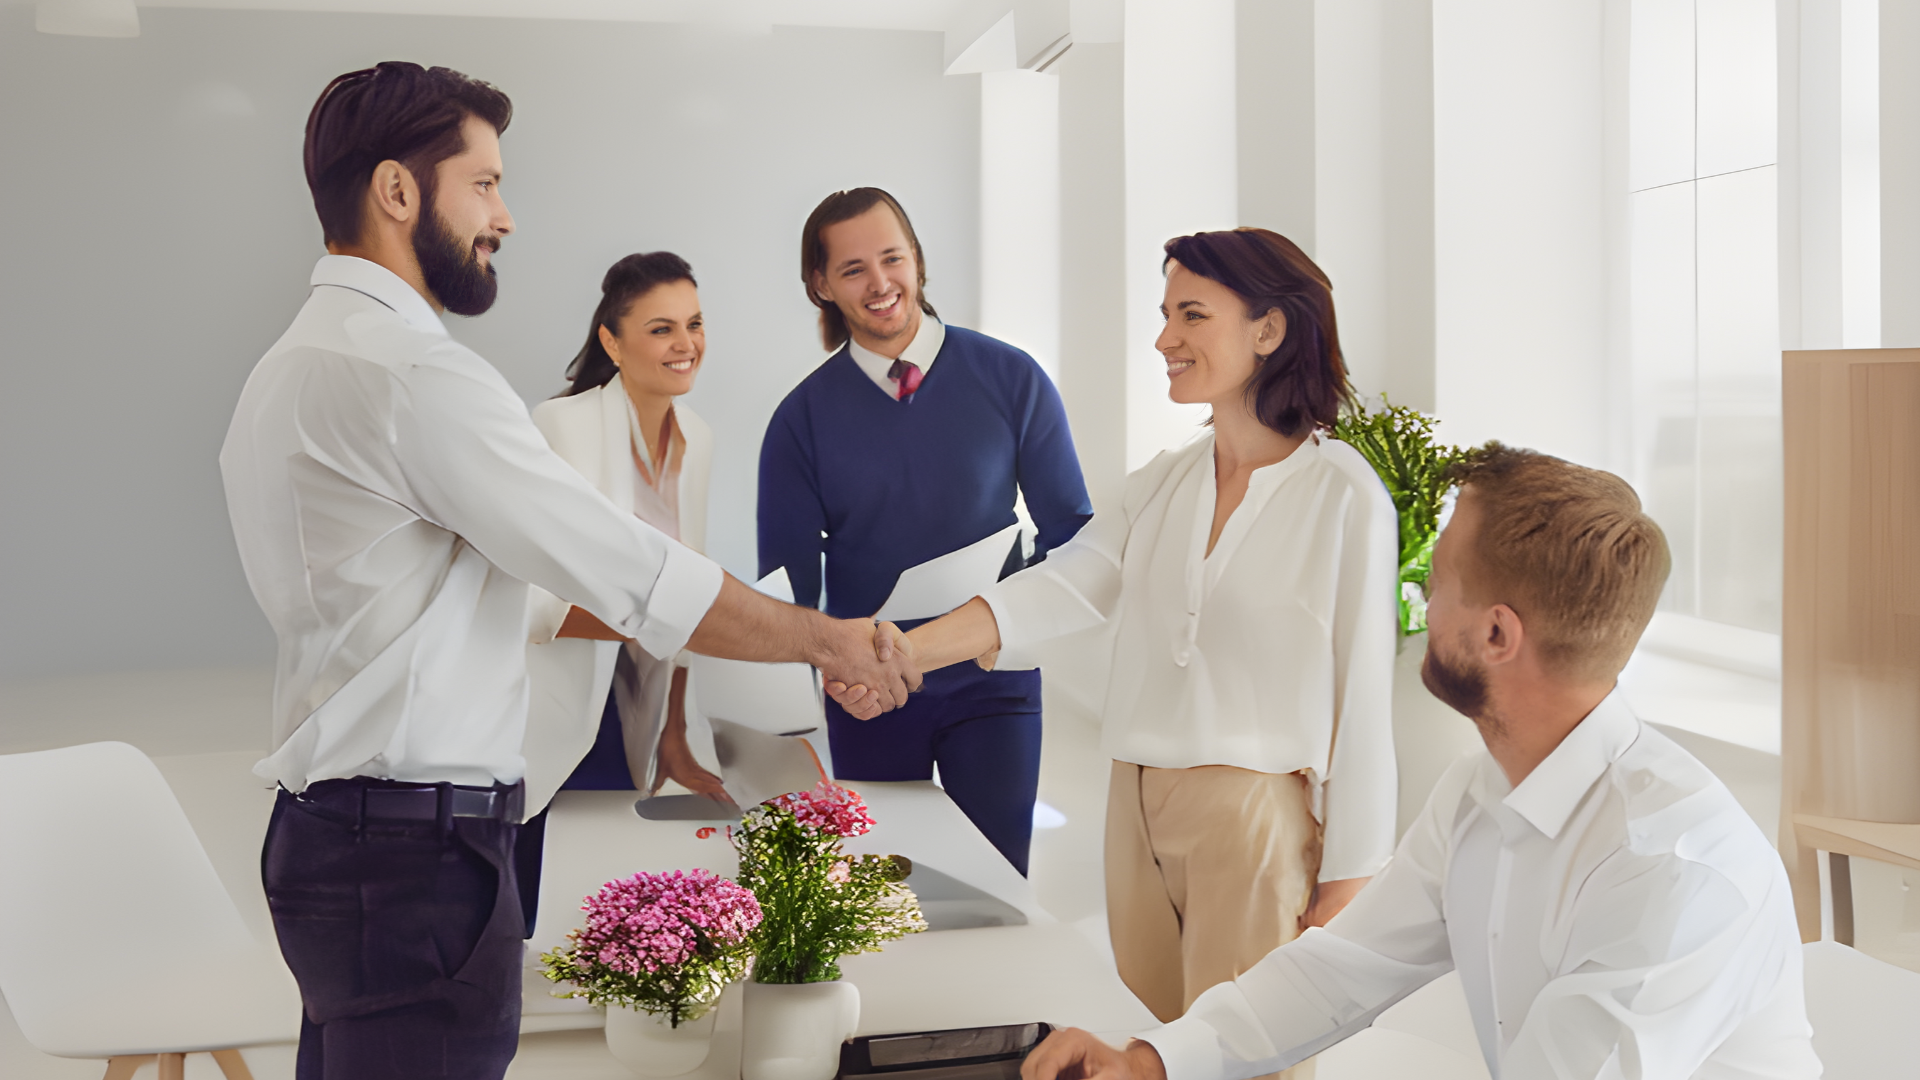 Floral industry job interview: Woman confidently shaking hands with HR interviewer